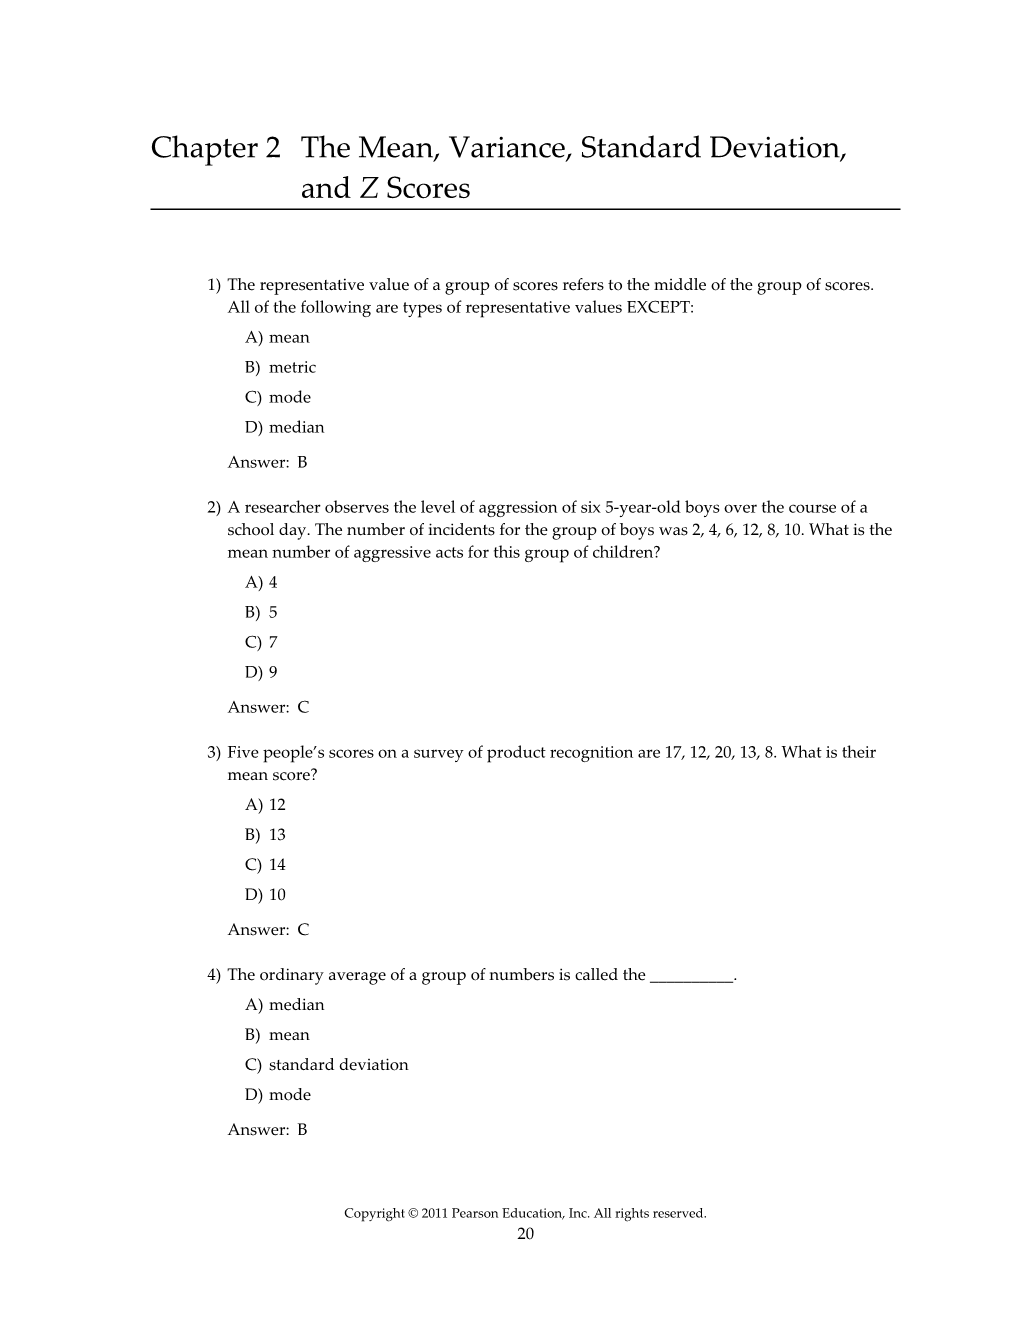 Chapter 2 the Mean, Variance, Standard Deviation, and Z Scores